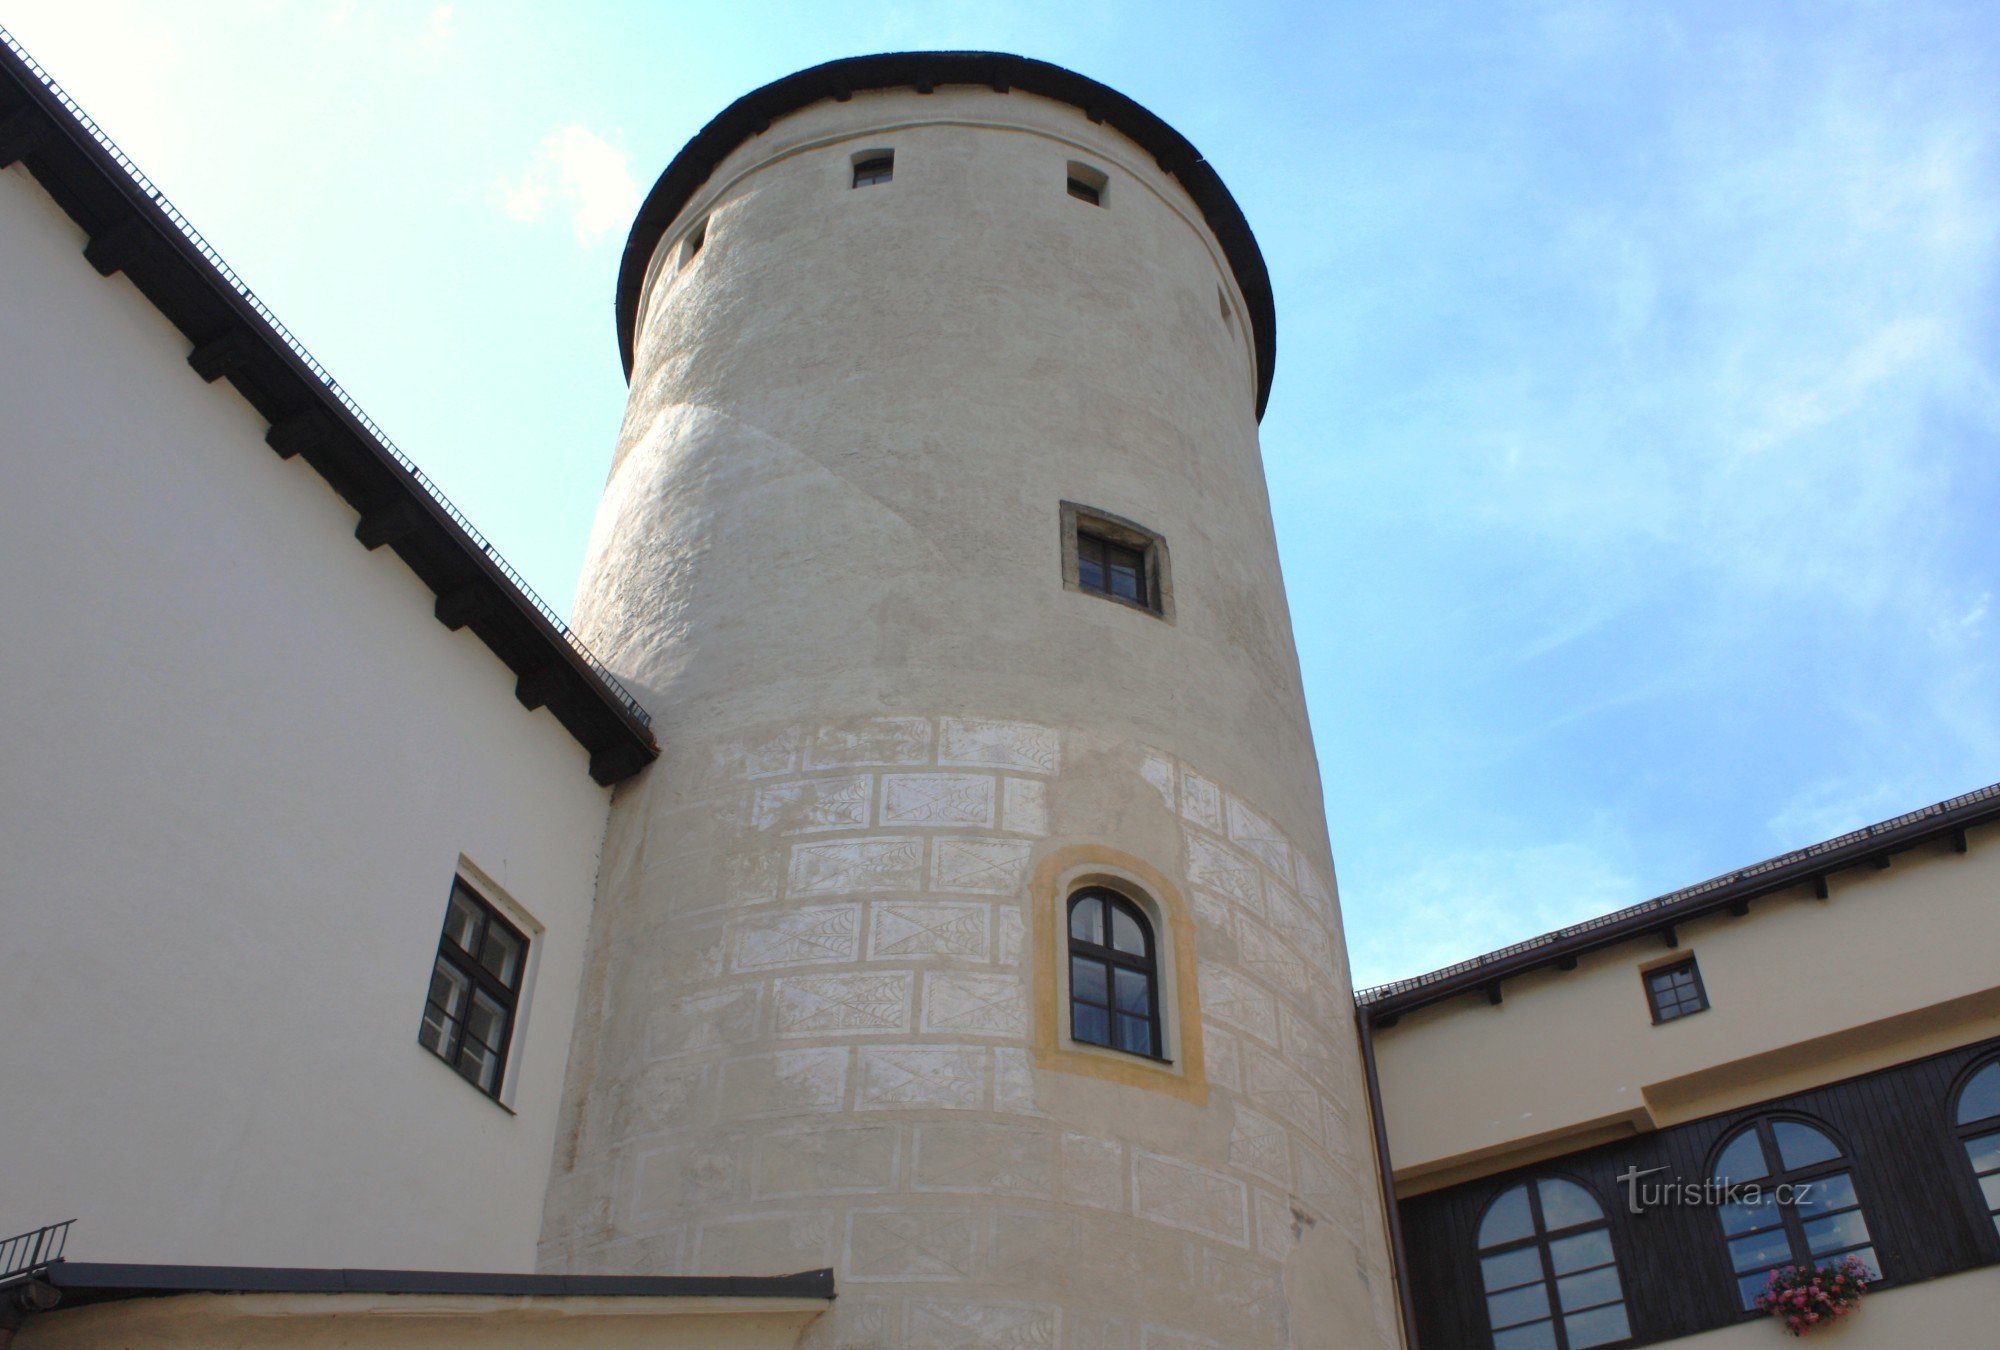 Castle tower from the courtyard